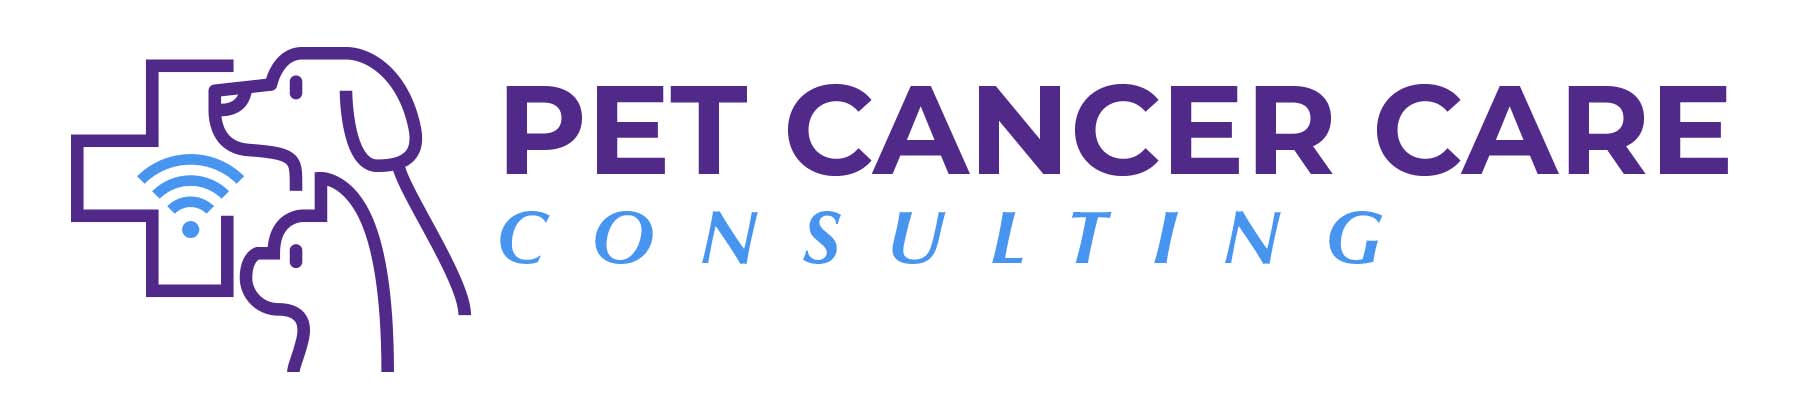 Pet Cancer Care Consulting logo